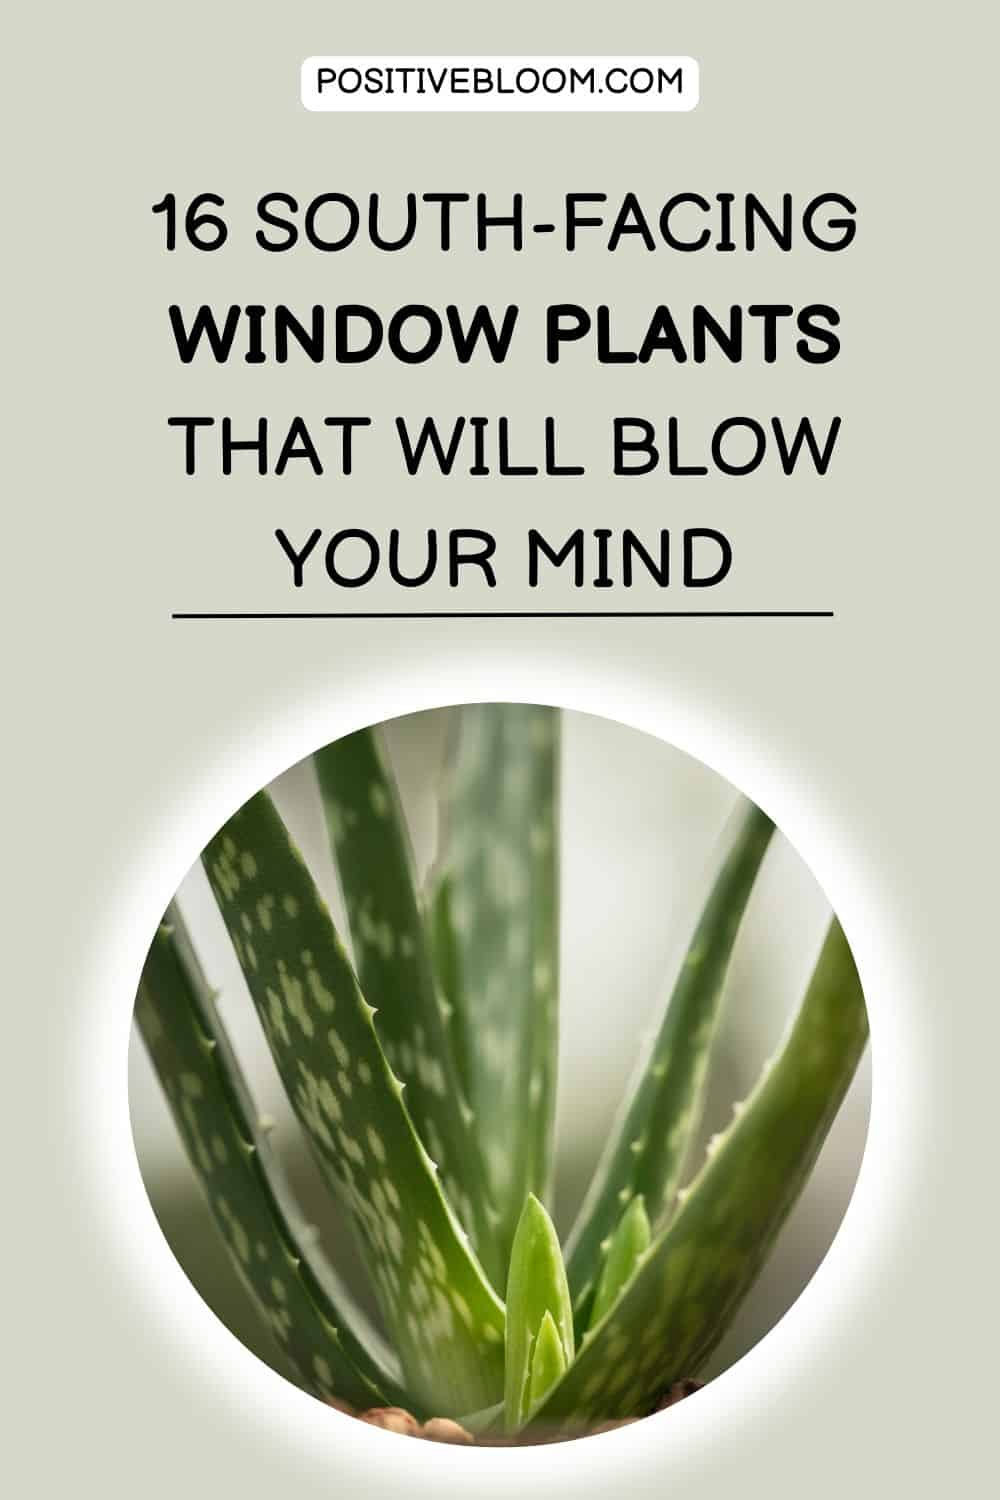 16 South-Facing Window Plants That Will Blow Your Mind